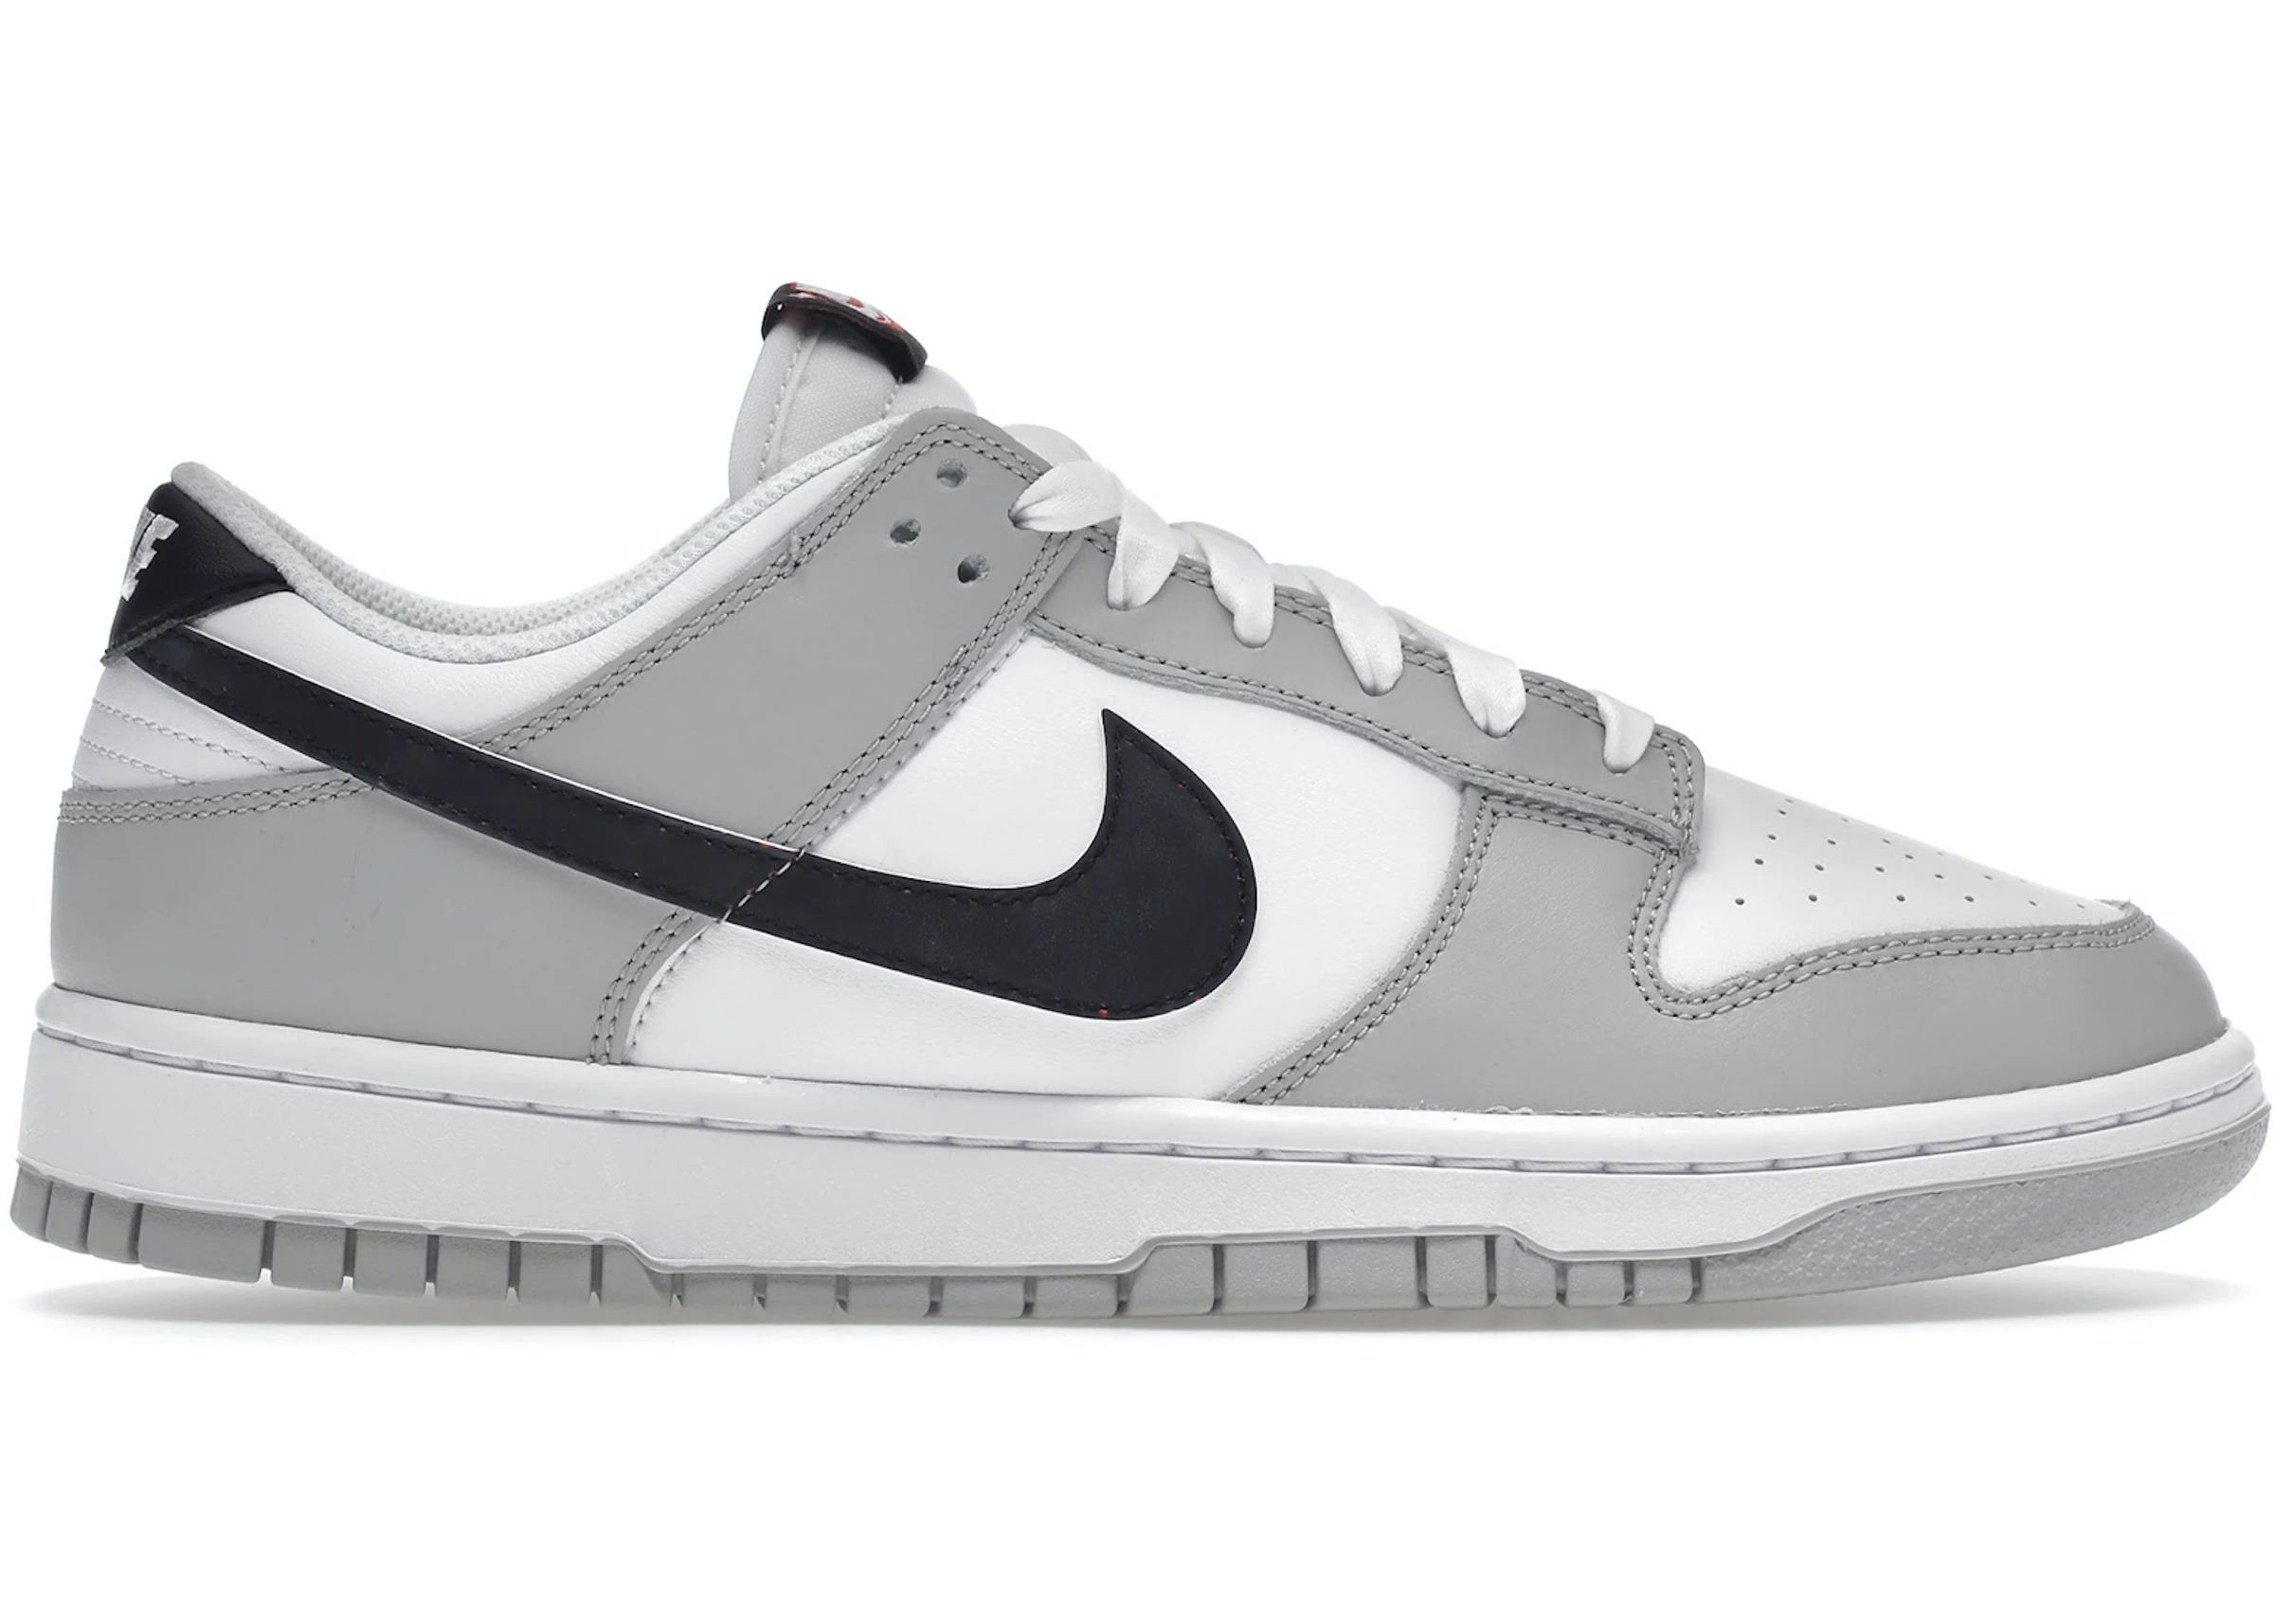 Nike Dunk Low dunk low black white SE Lottery Pack Grey Fog